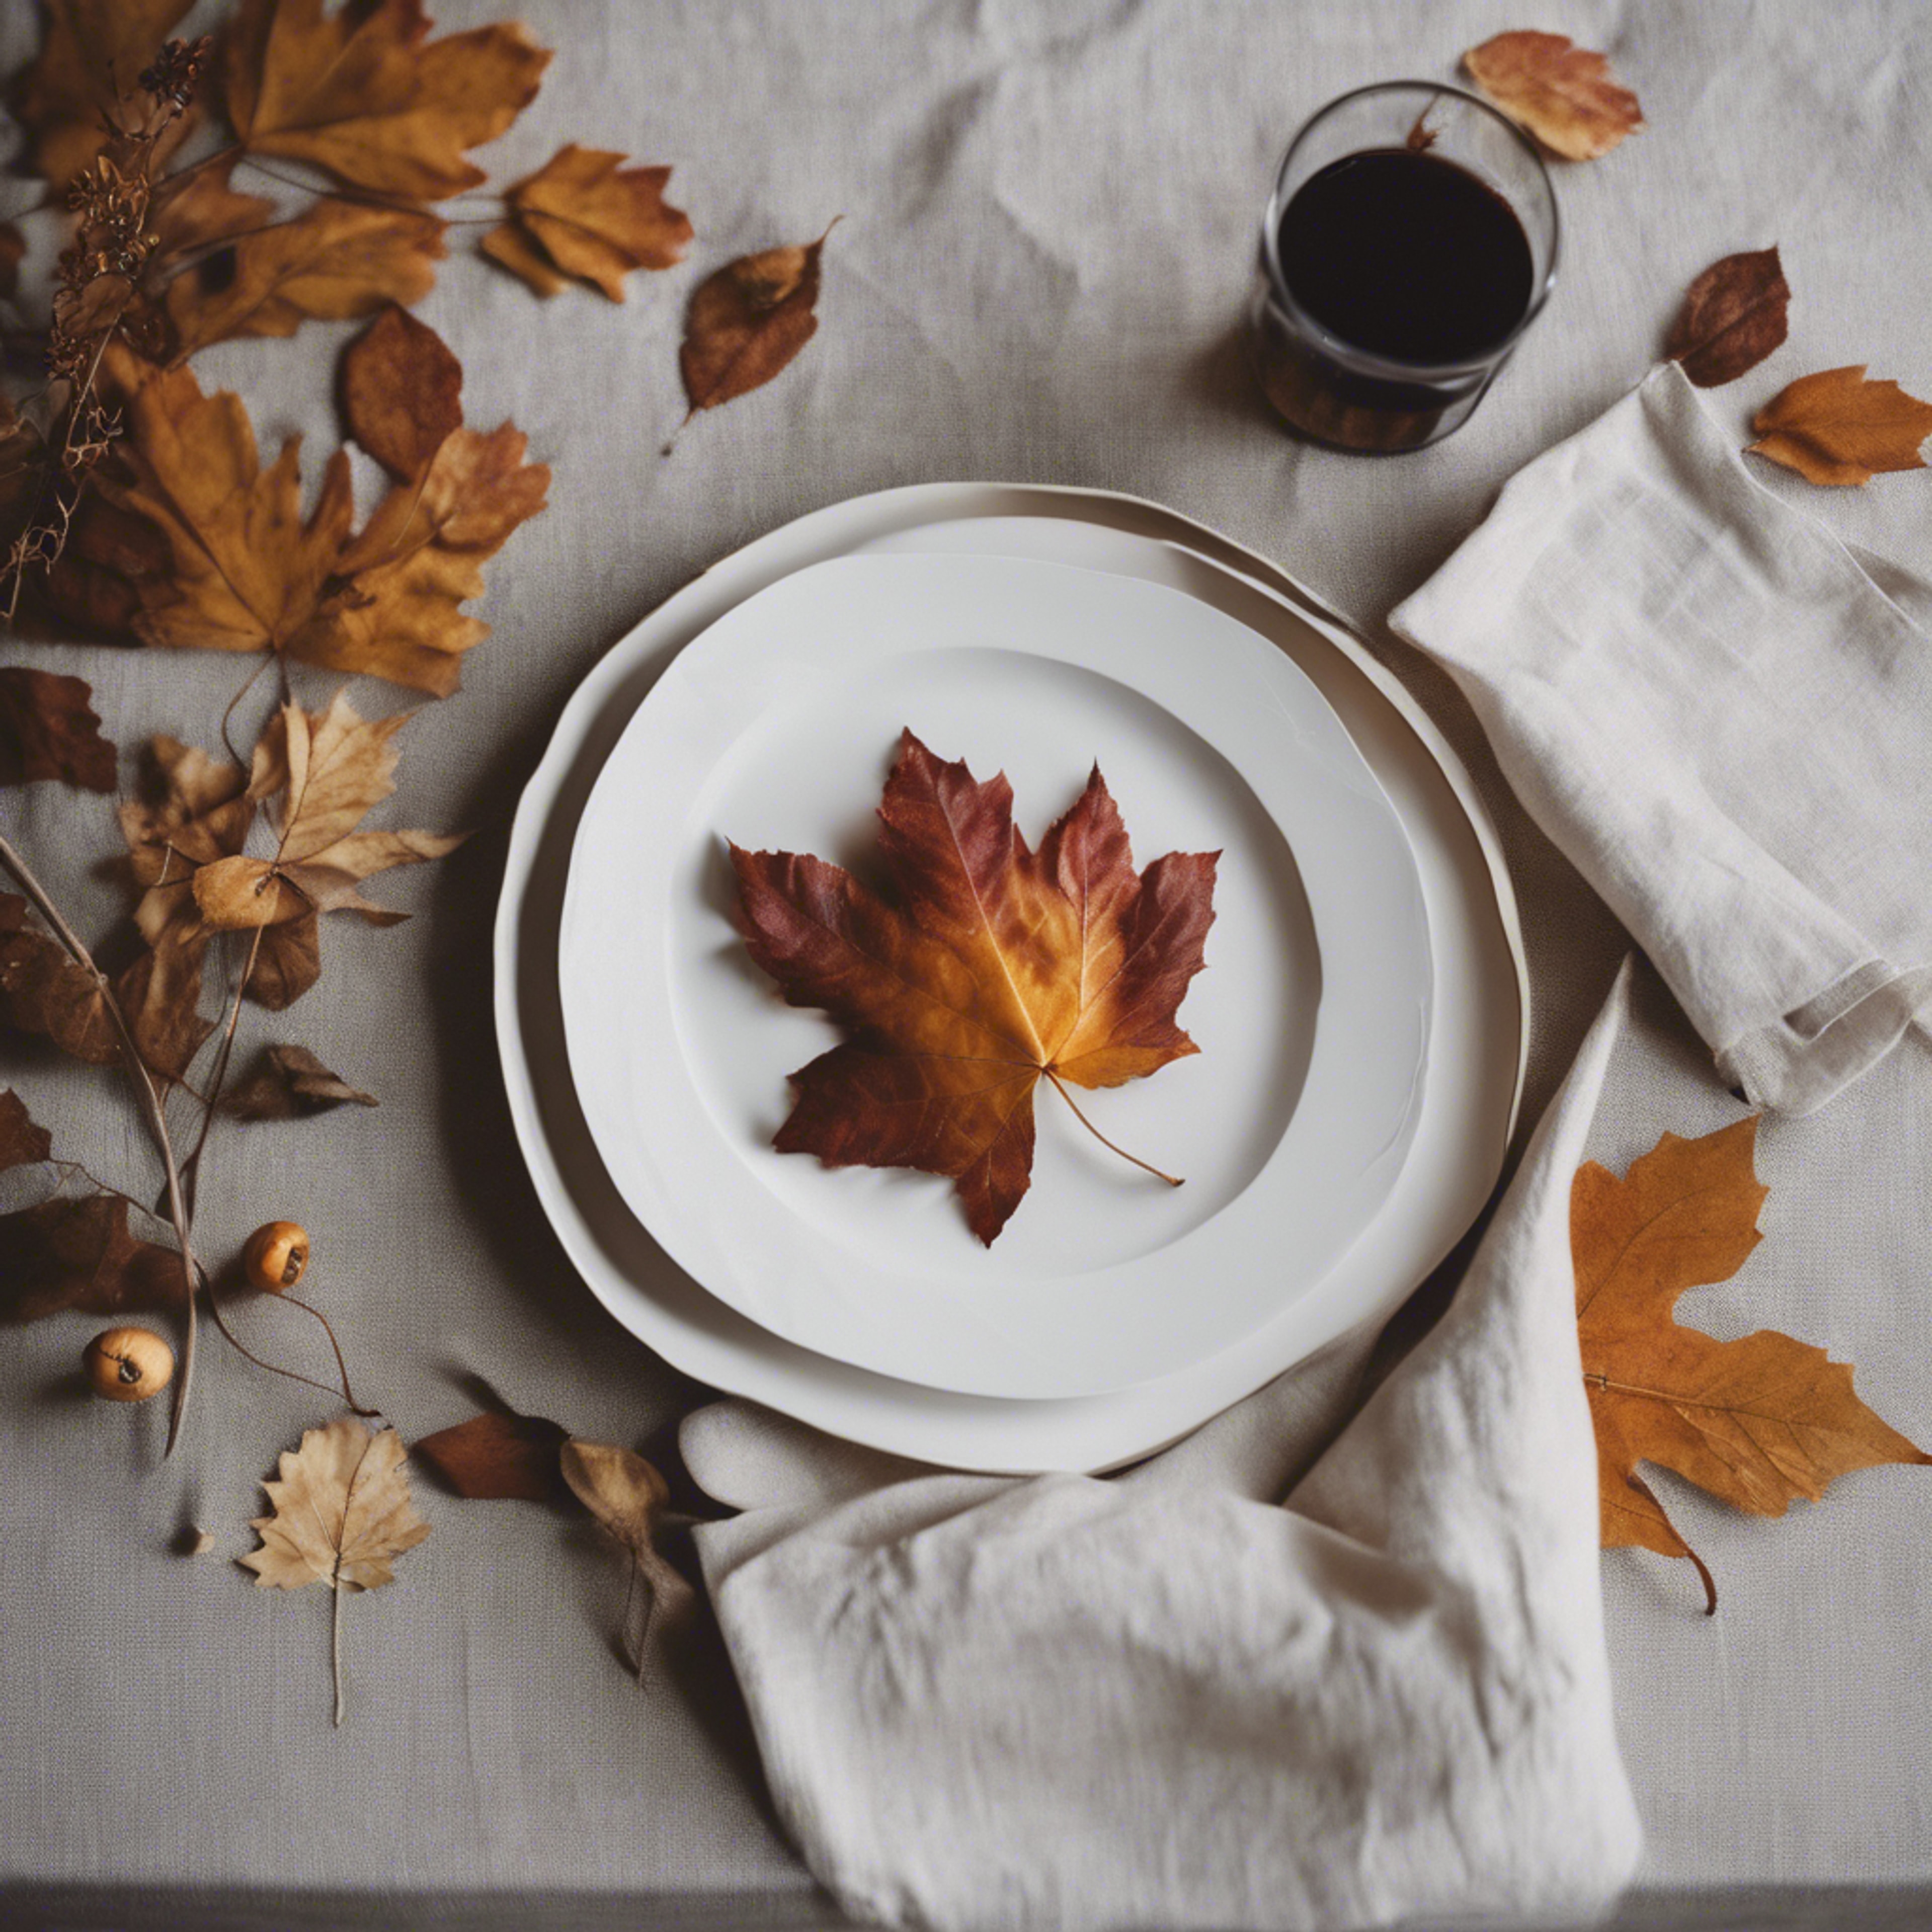 Simplicity-lover's Thanksgiving table decor with minimalistic white plates, natural linen napkins, and a few scattered autumn leaves. 牆紙[4fdd30c95e164a8e8309]